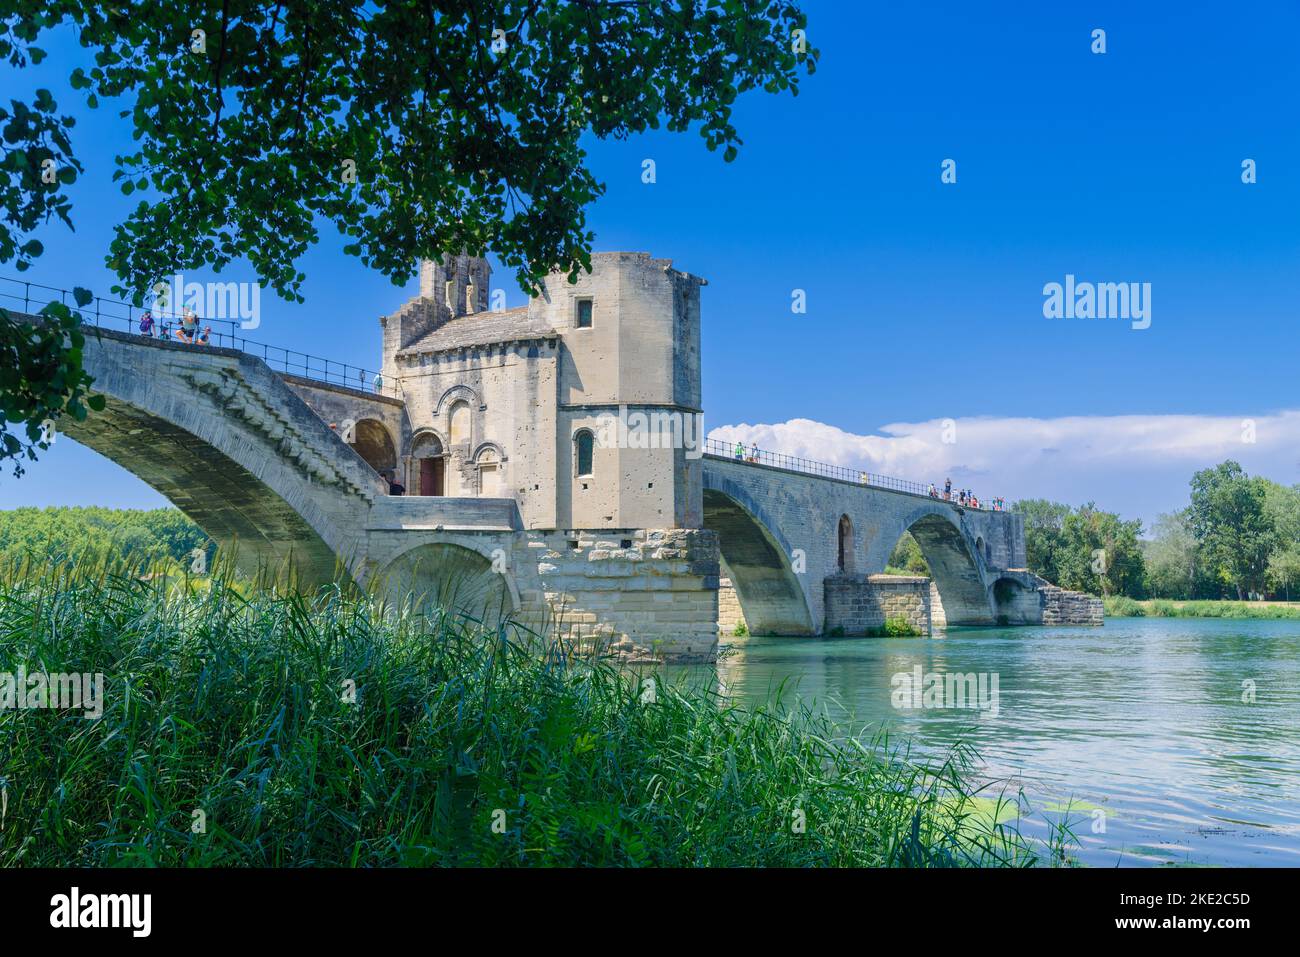 The Pont Saint-Bénézet, also known as the Pont d'Avignon, was a medieval bridge across the Rhône in the town of Avignon, in southern France. Only four Stock Photo